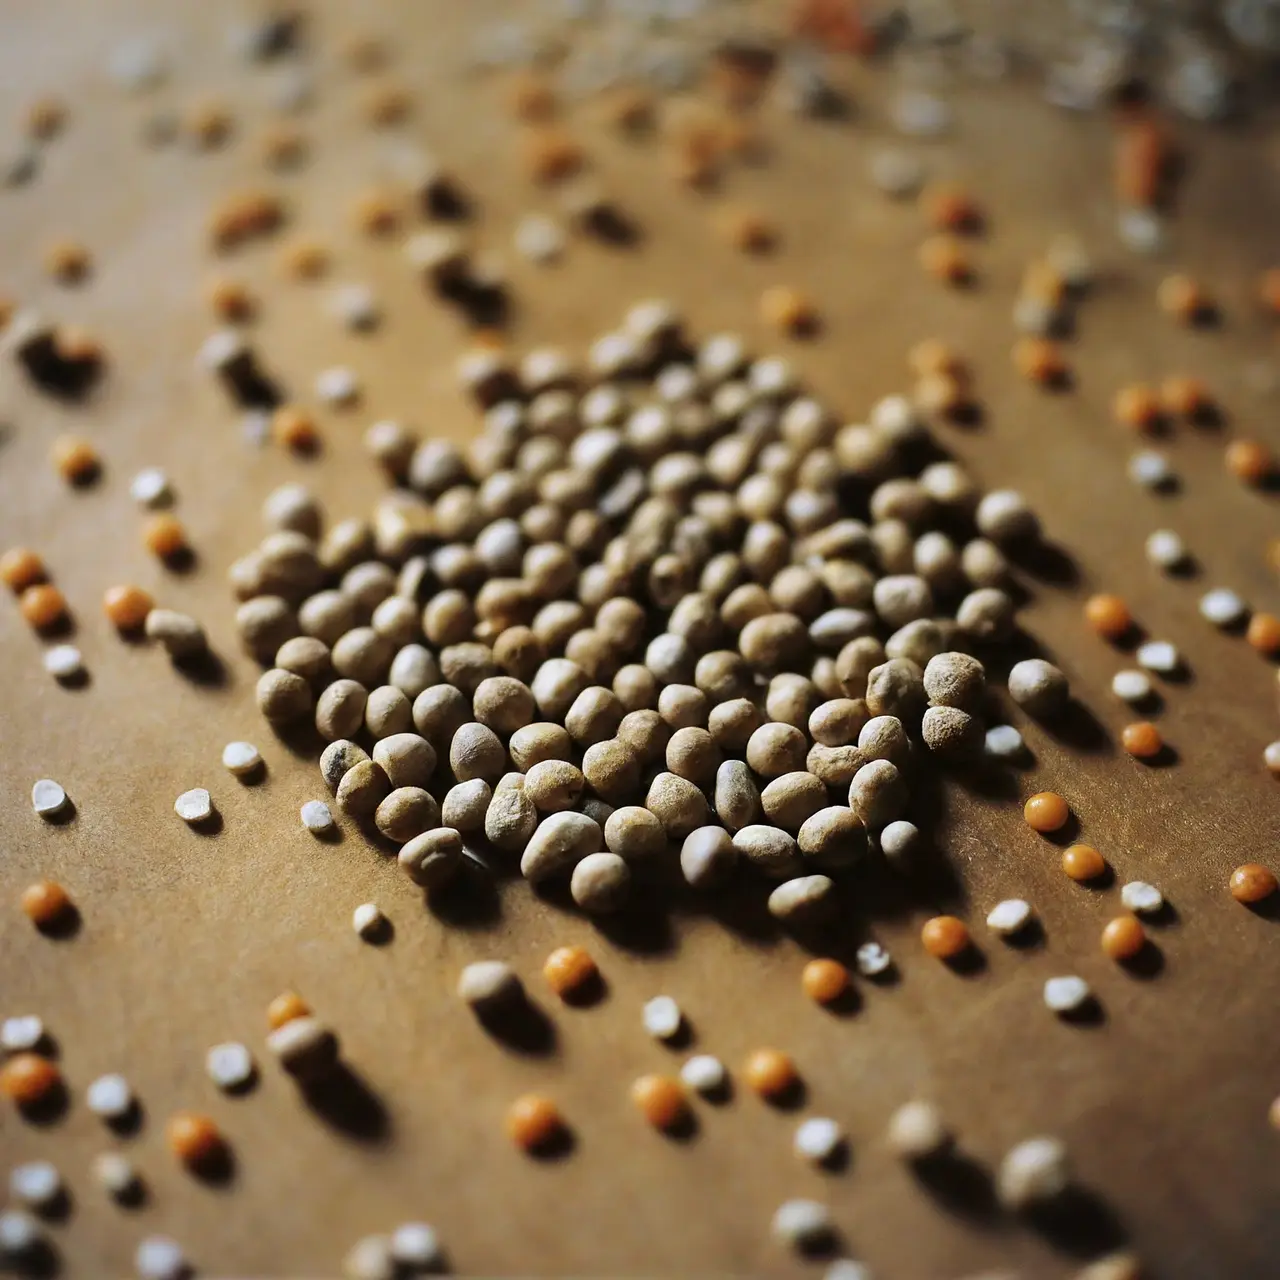 A variety of grains spread out on a wooden surface. 35mm stock photo